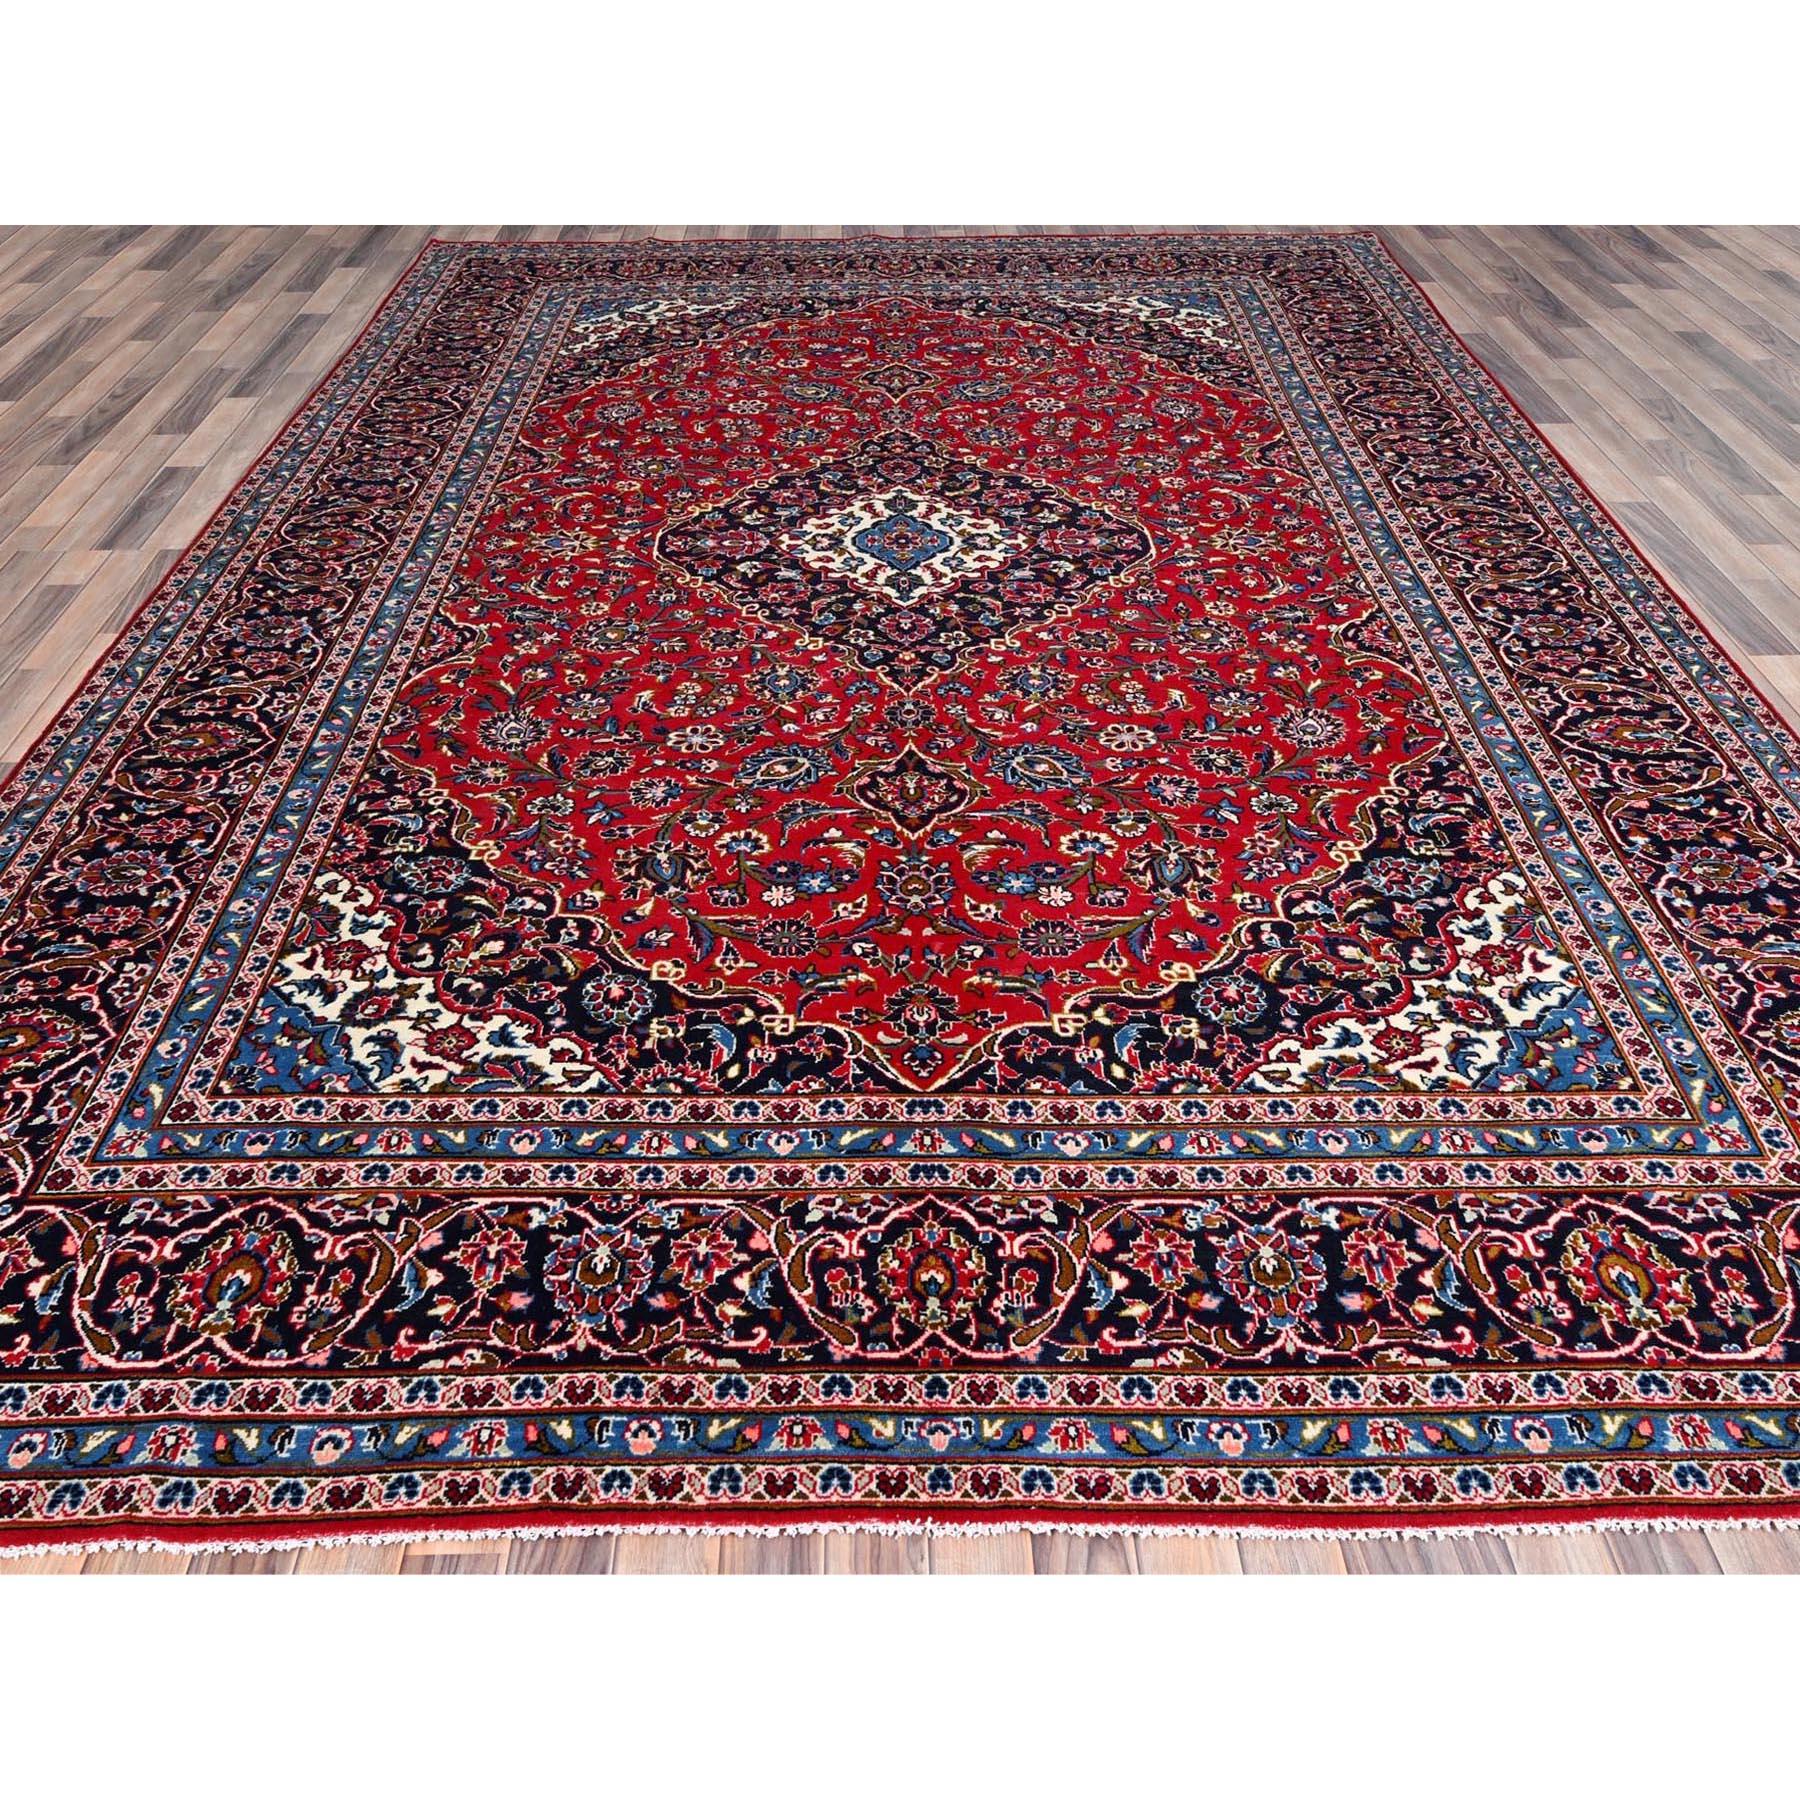 Medieval Red Worn Wool Hand Knotted Vintage Persian Kashan Dense Weave Pure Wool Soft Rug For Sale